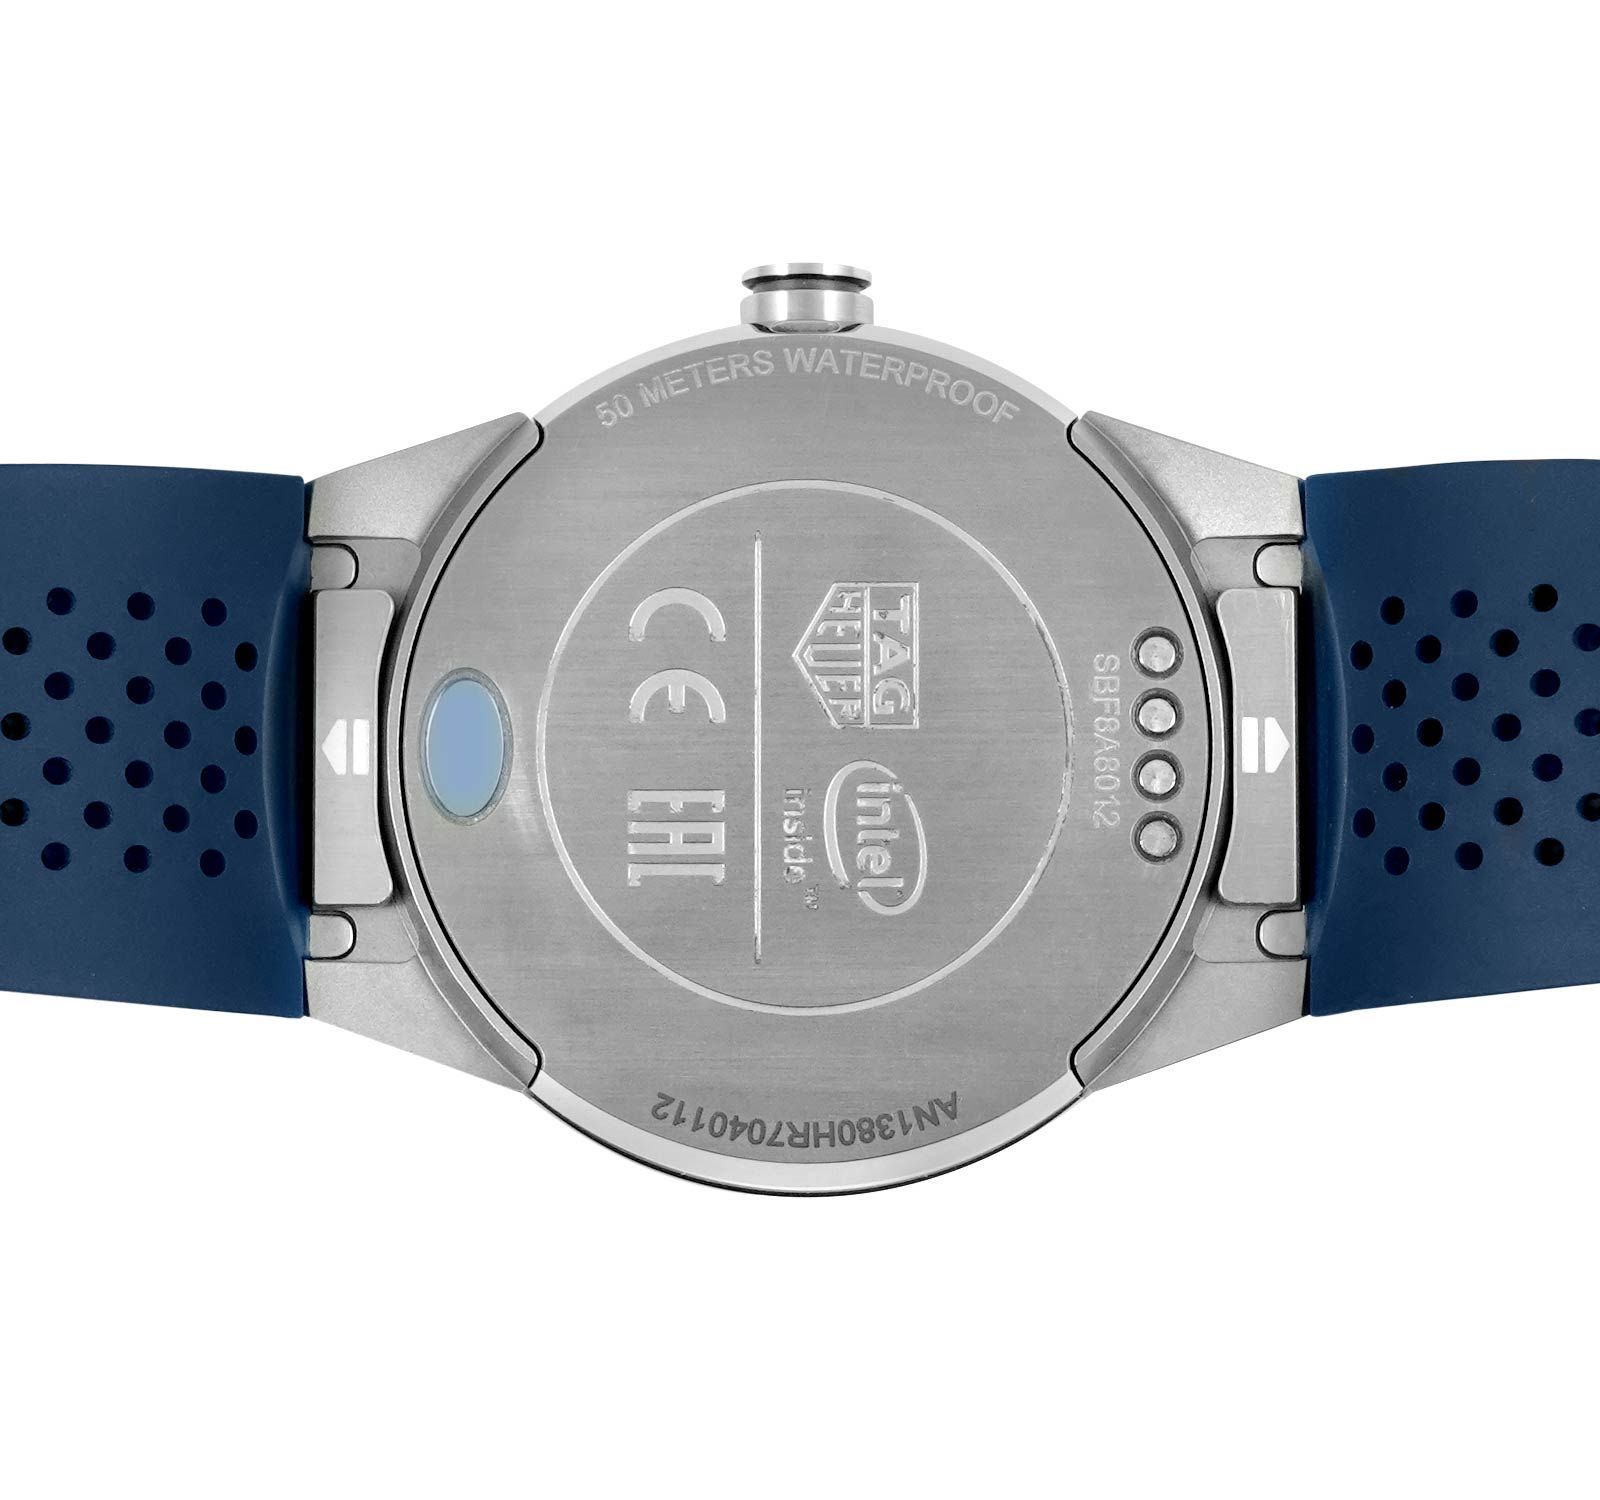 TAG Heuer Connected Modular Features